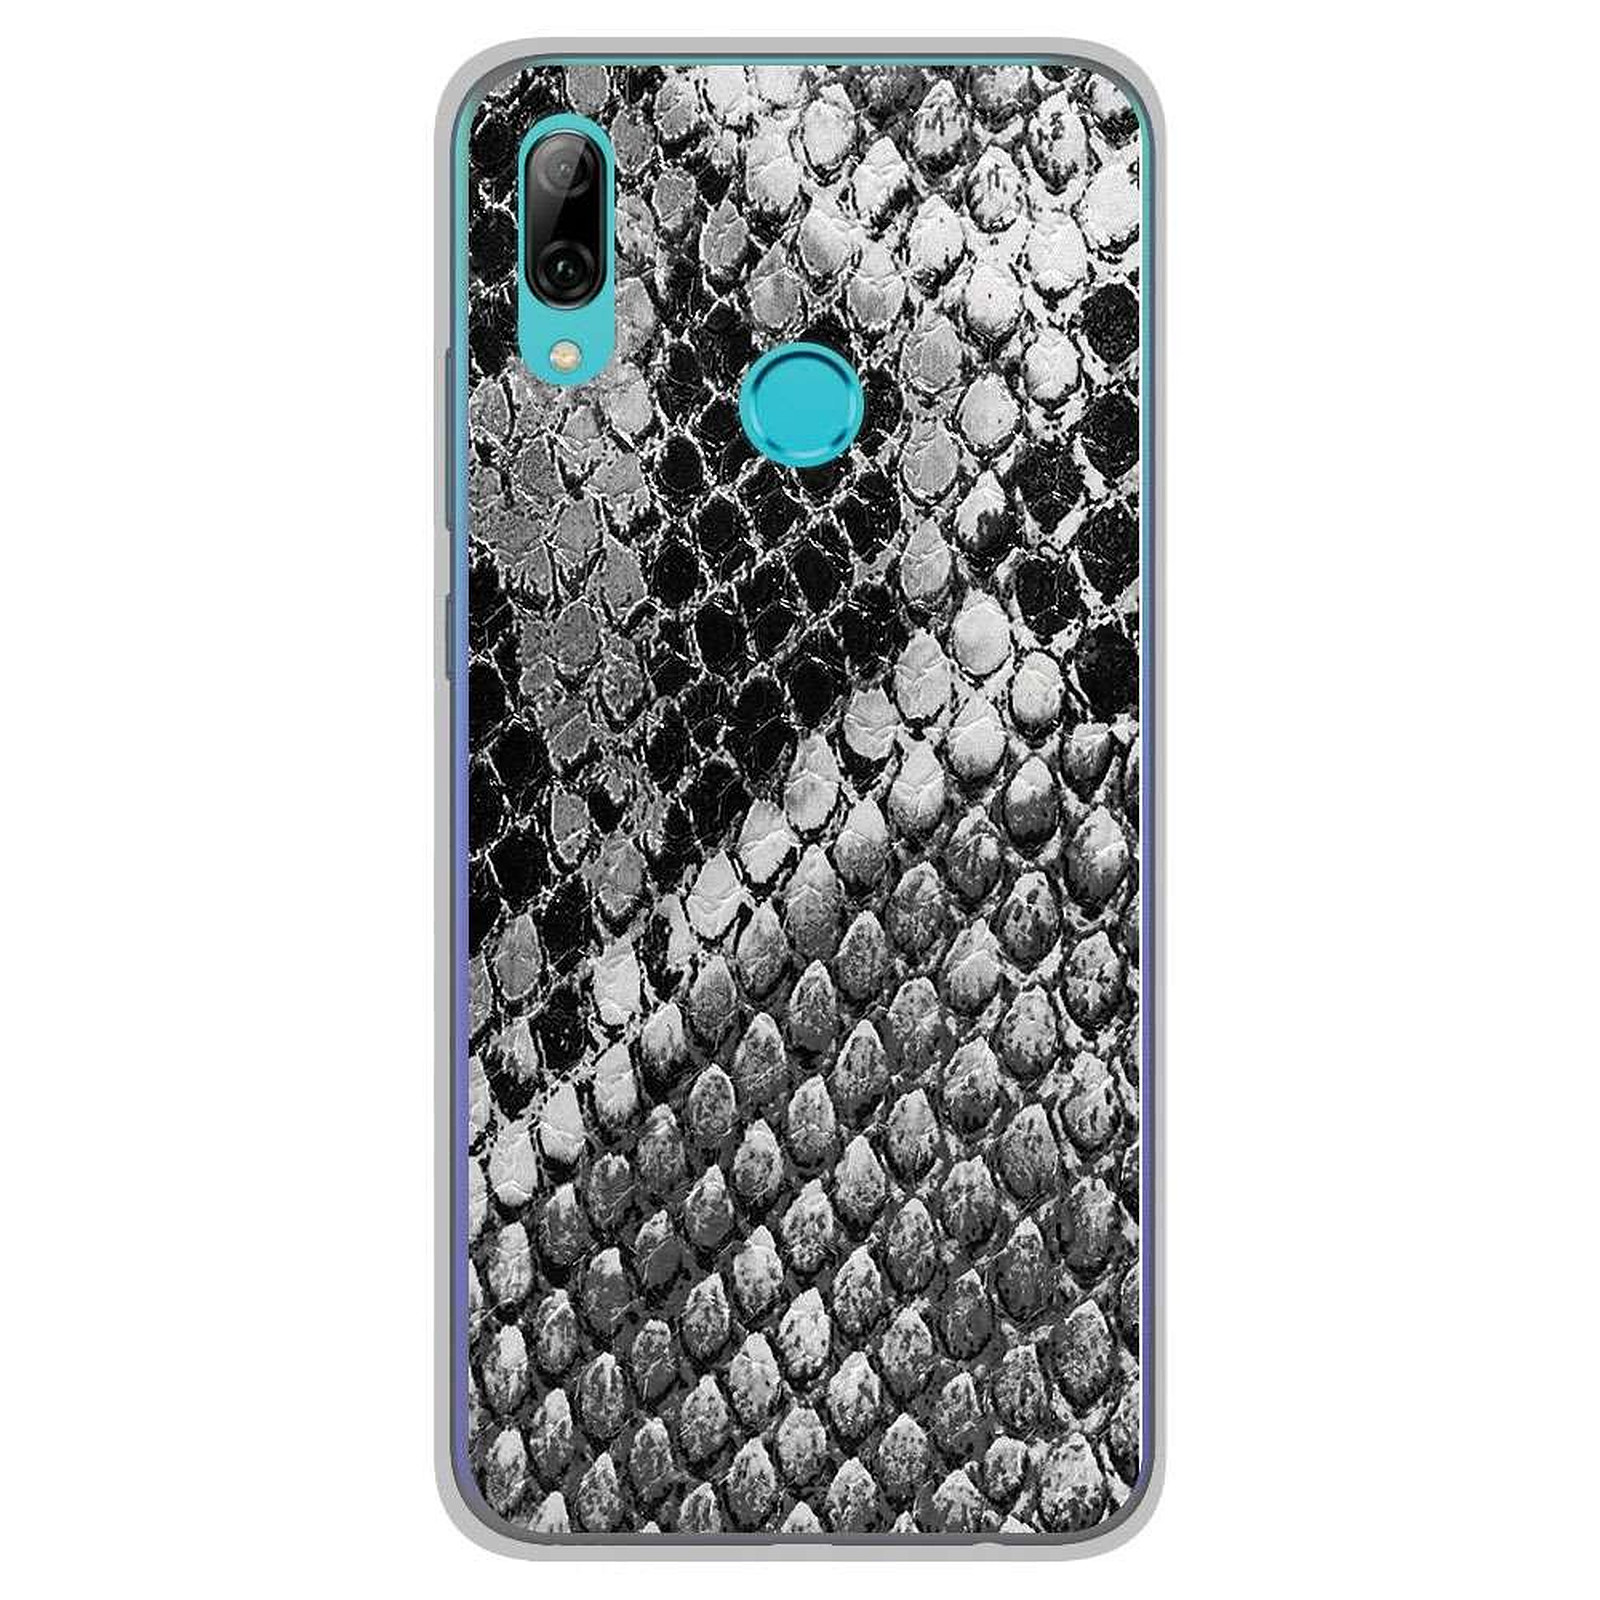 1001 Coques Coque silicone gel Huawei P Smart 2019 motif Texture Python - Coque telephone 1001Coques